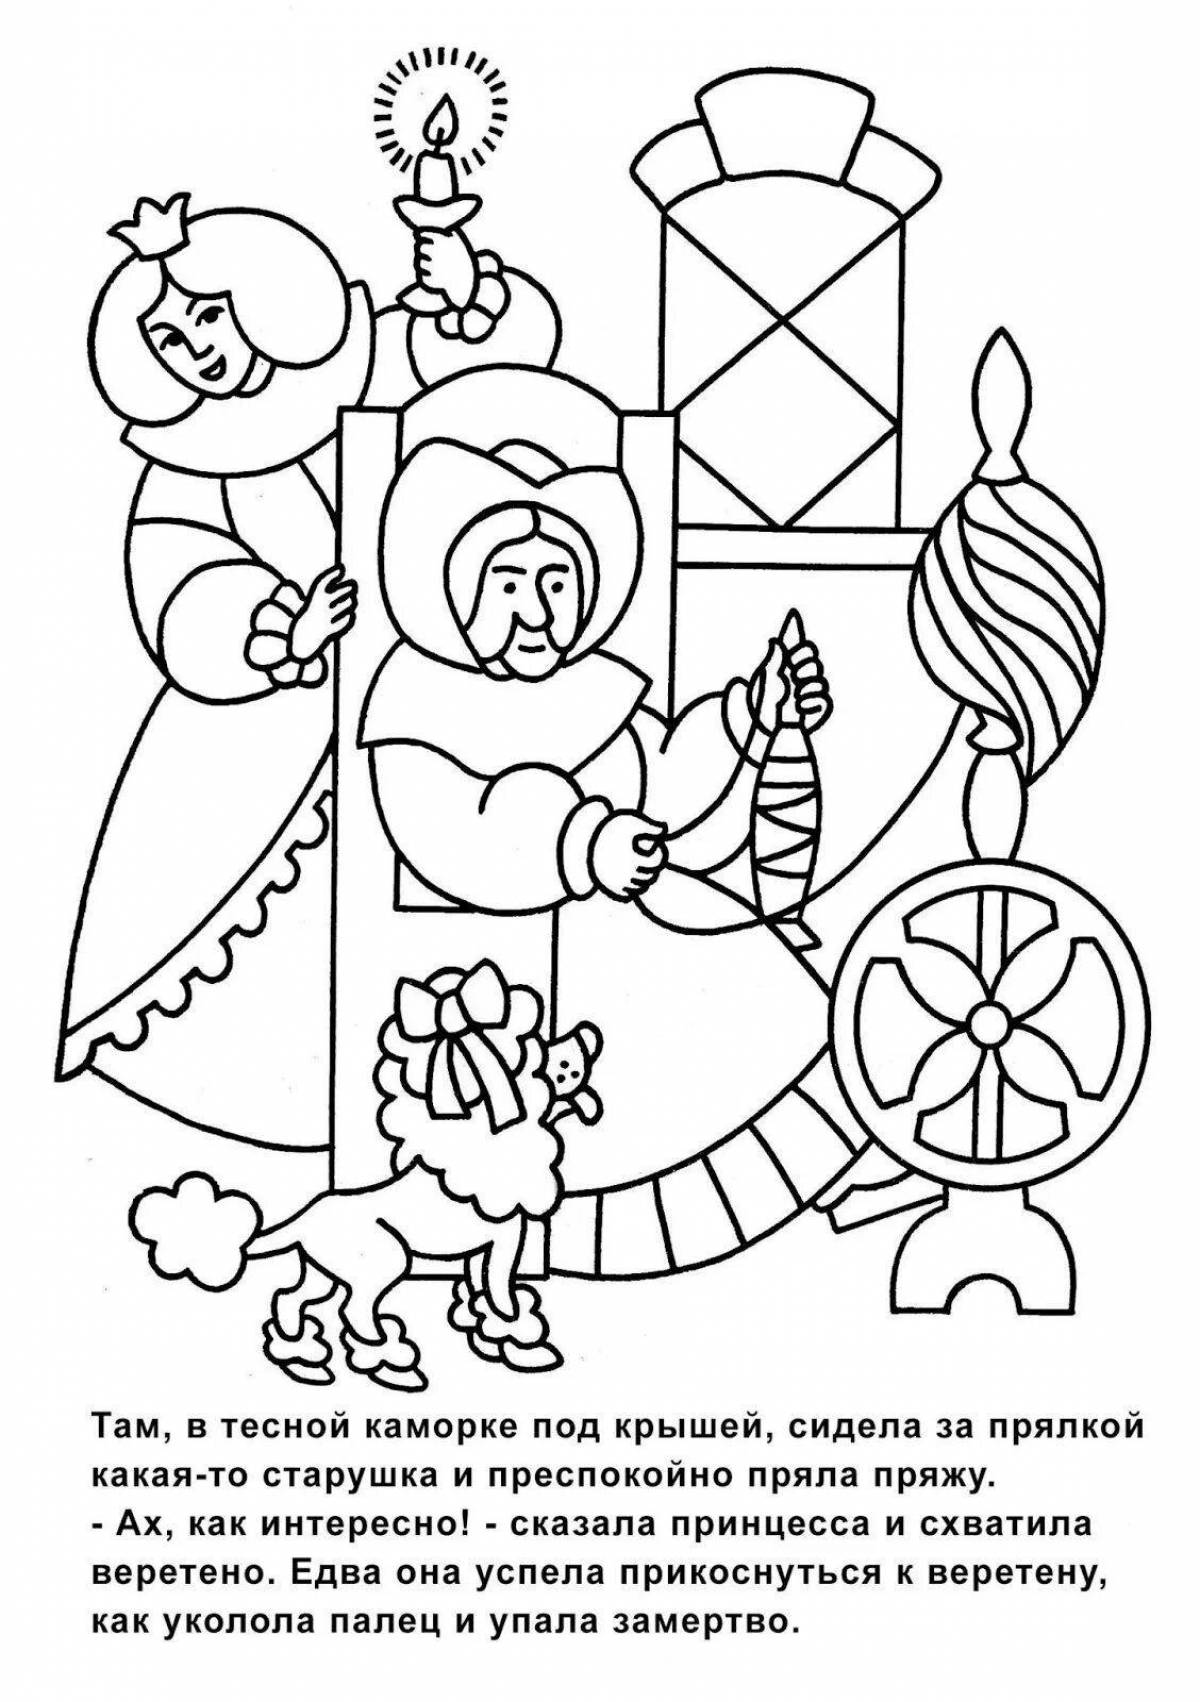 Fairy-tale coloring pages heroes of Charles Perrault's fairy tales